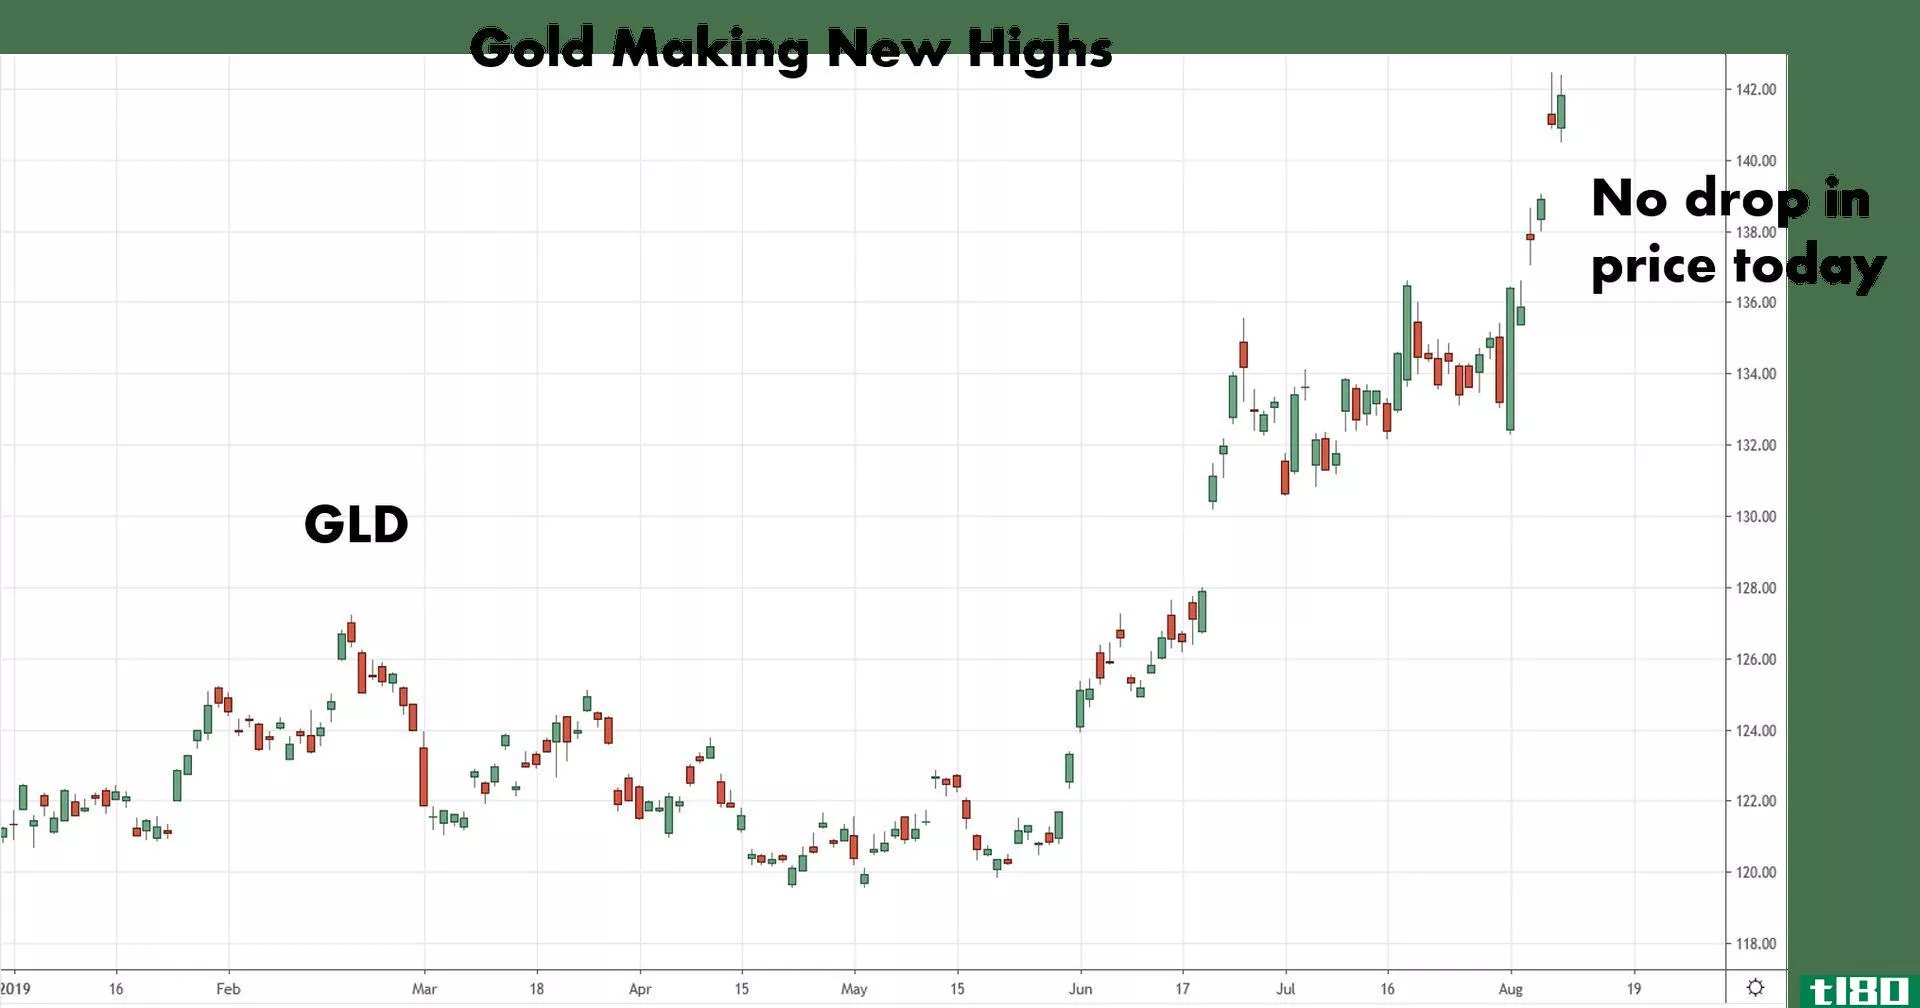 Chart showing gold making new highs